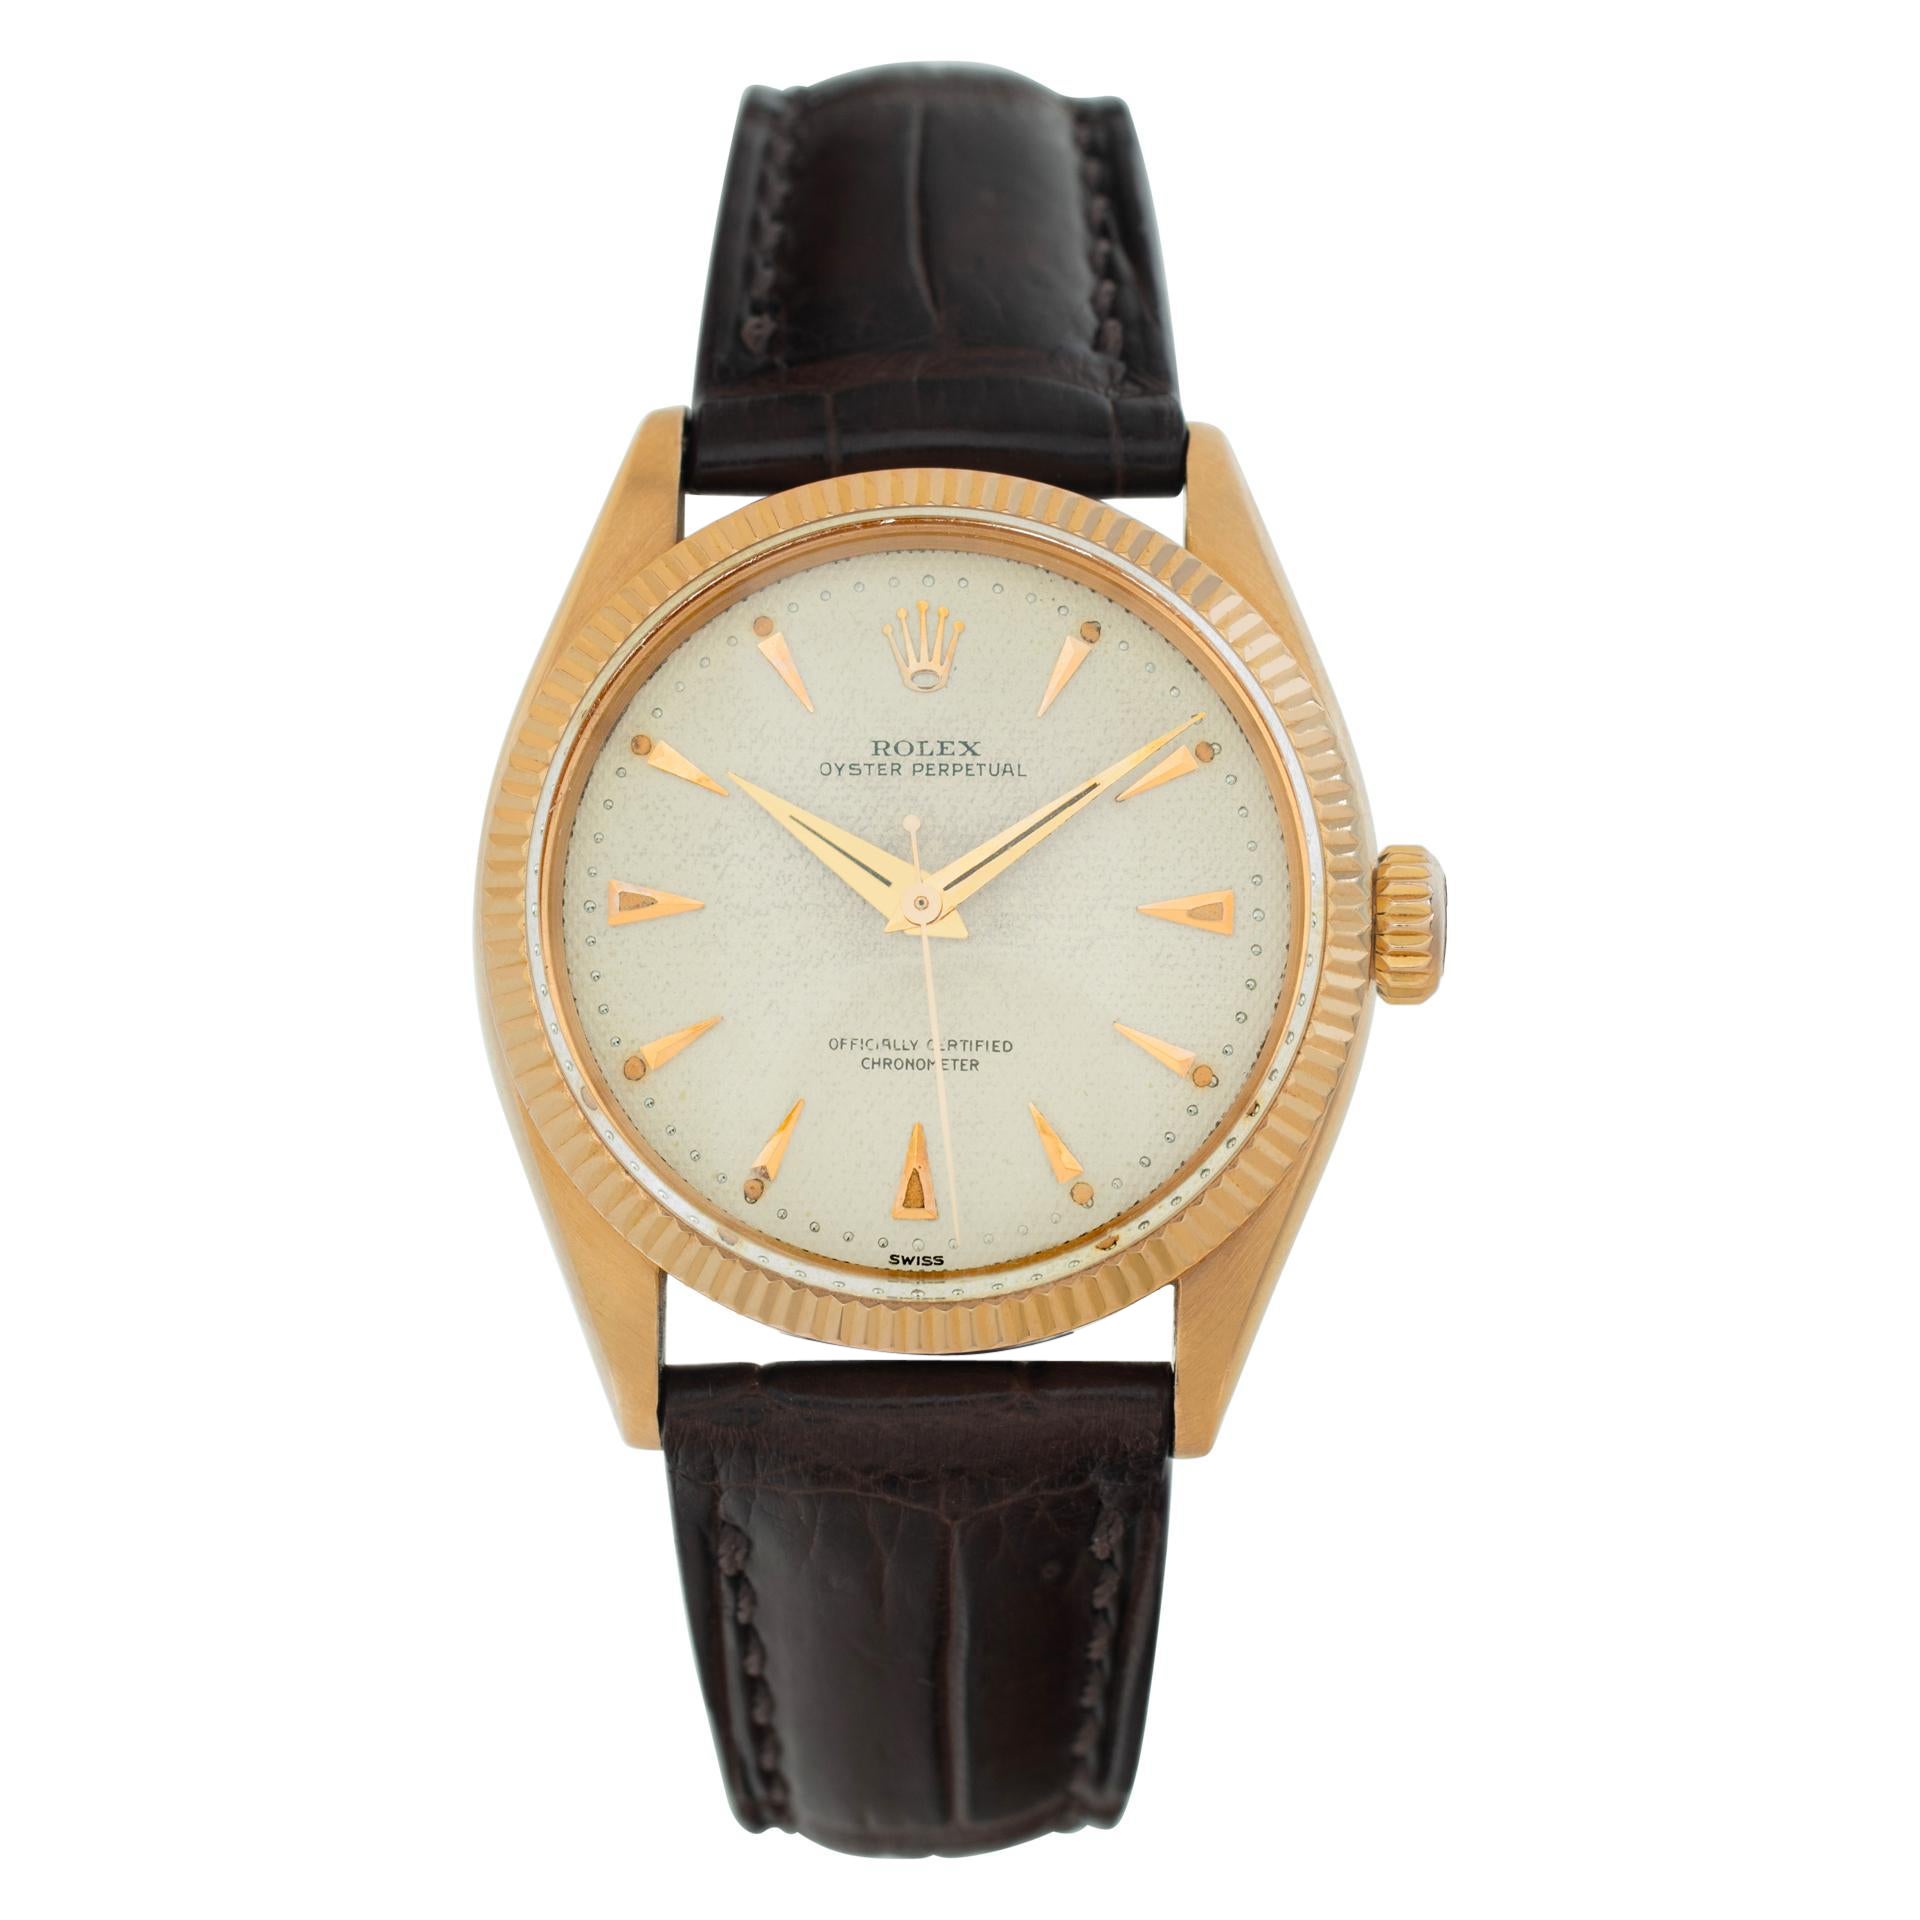 Rolex Oyster Perpetual 18k rose gold Automatic Wristwatch Ref 6285 For Sale